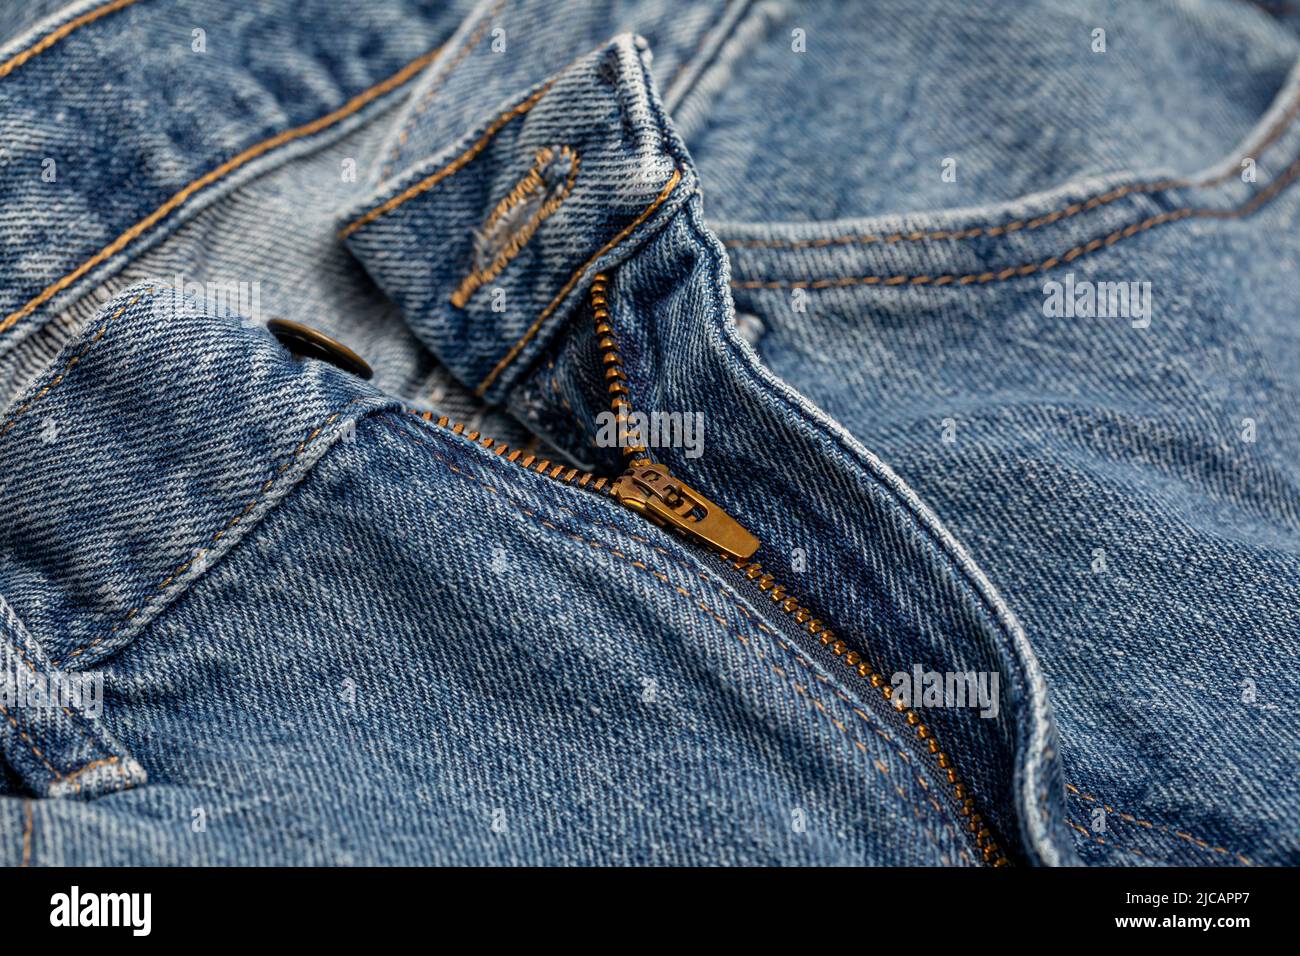 Blue jeans pants and zipper. Diet, weight loss and gain concept. Stock Photo